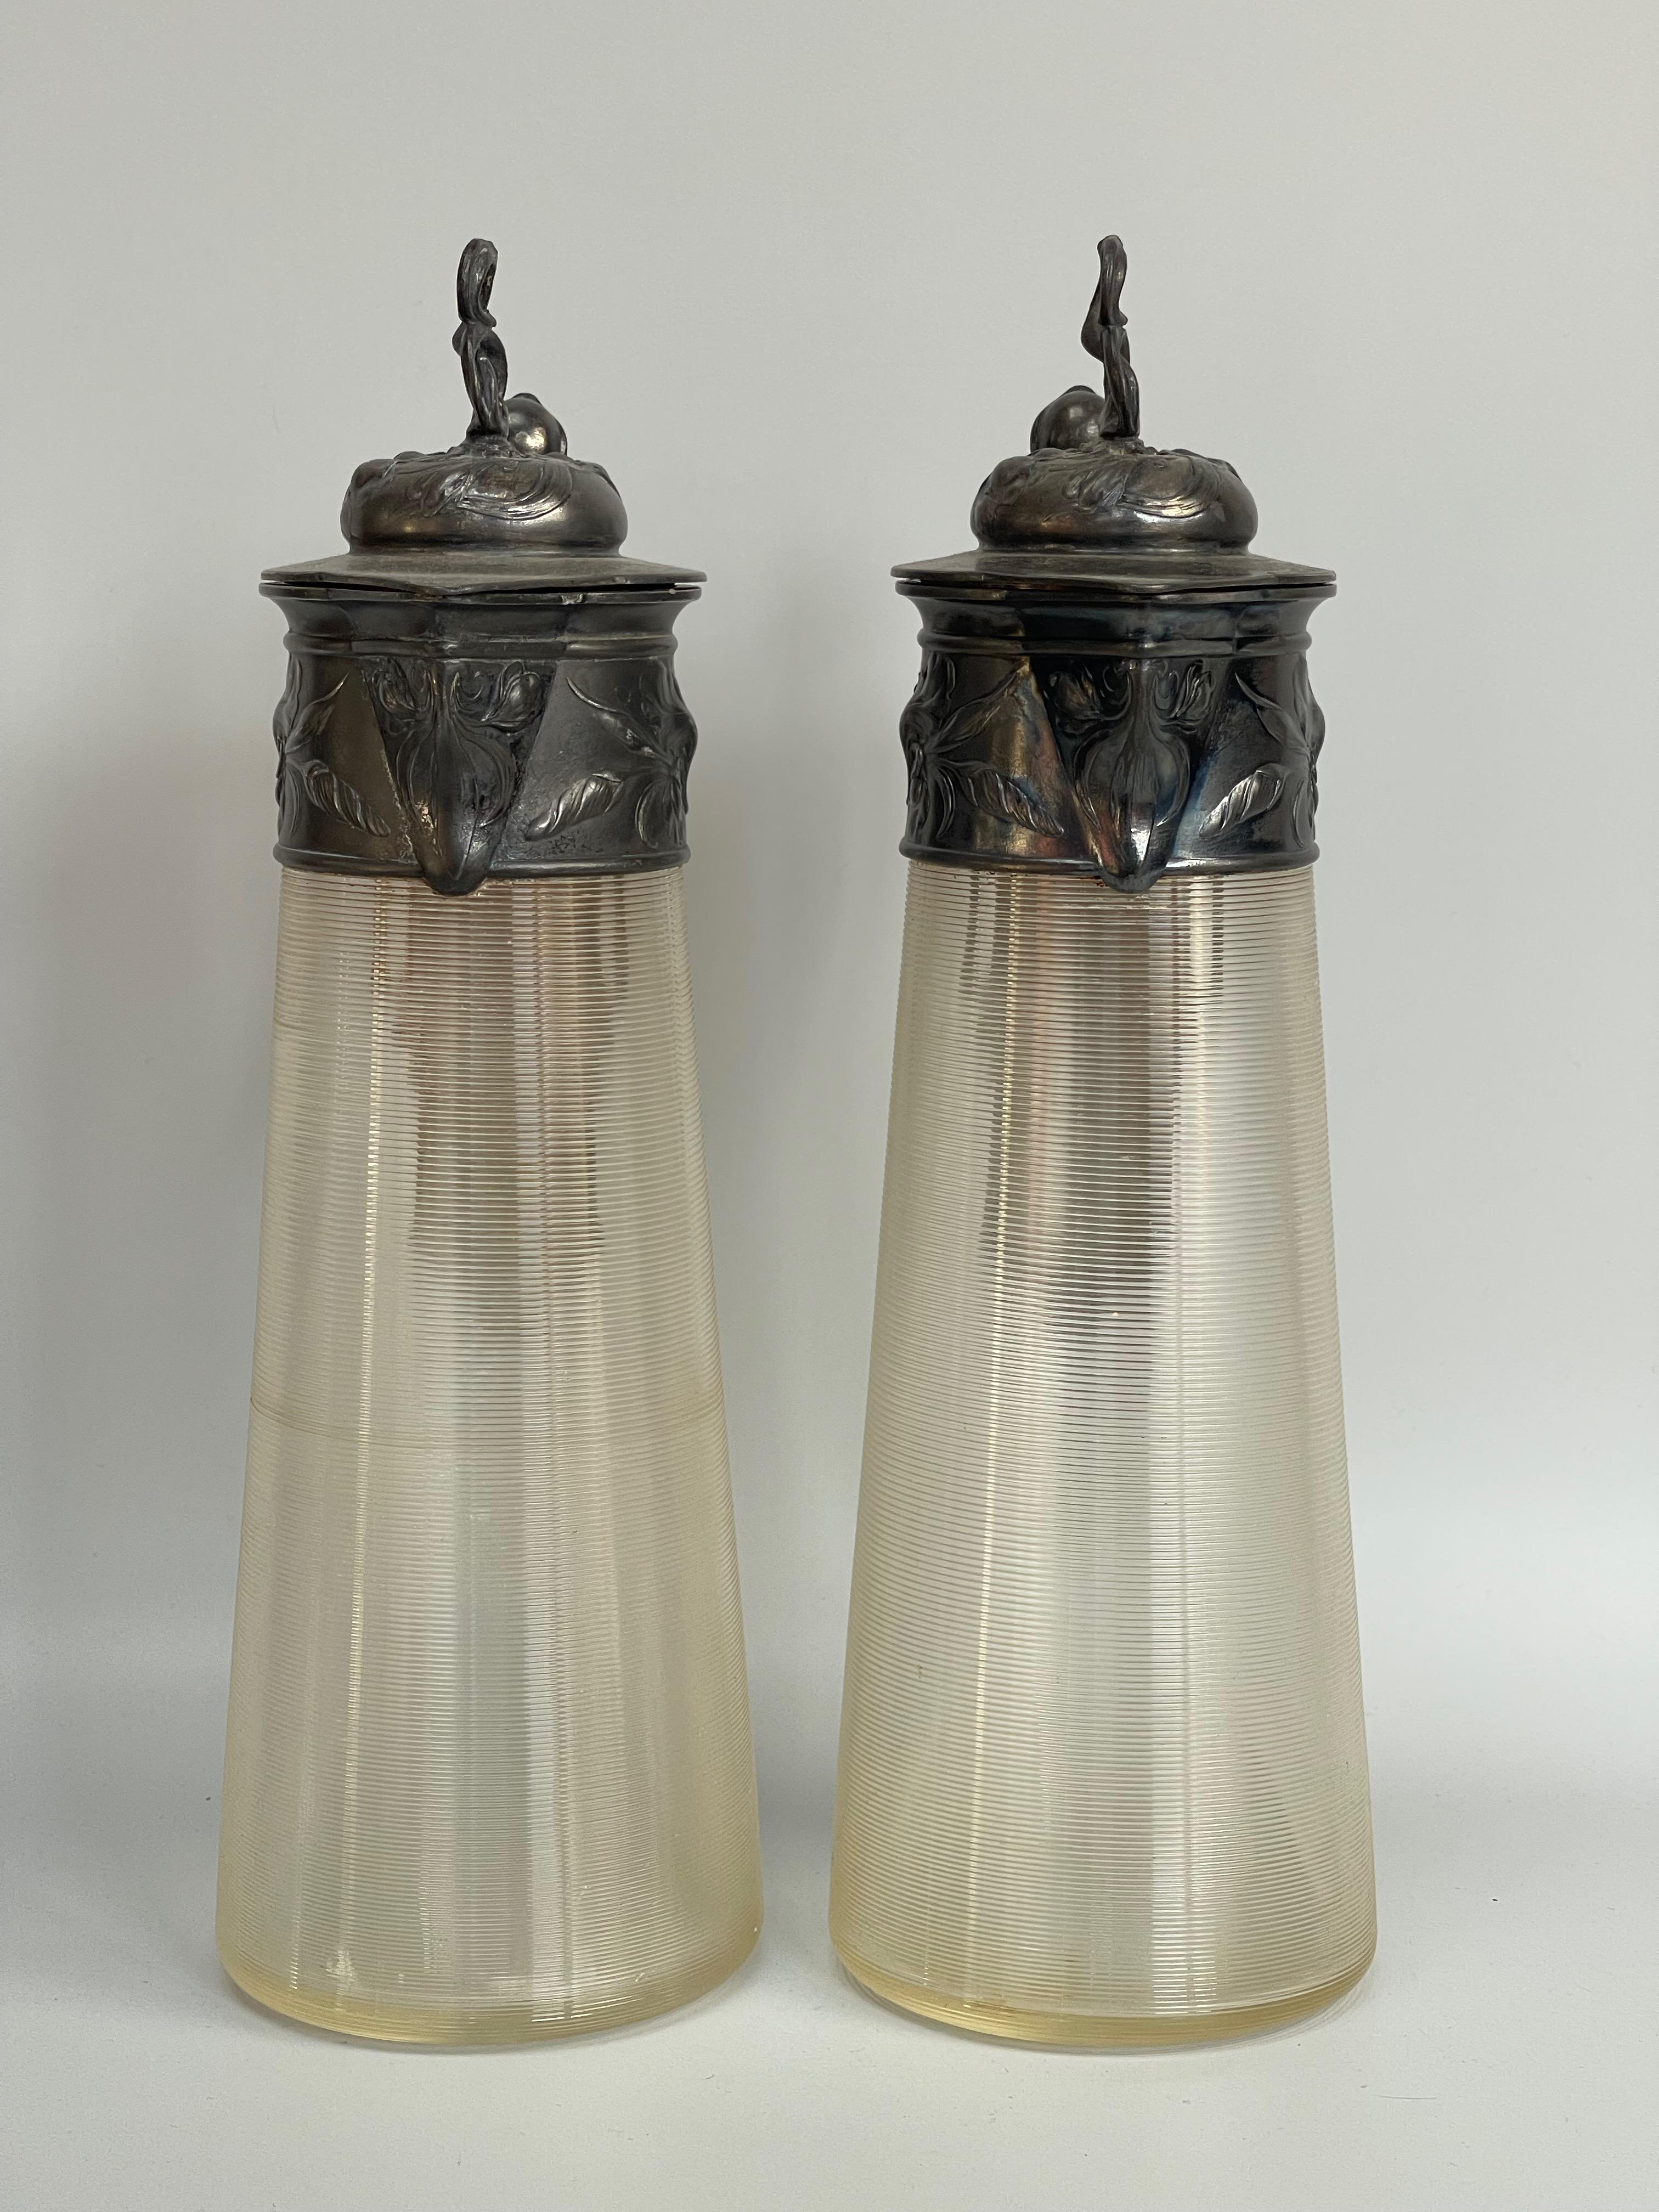 Pair of silver metal ewers with floral decoration circa 1900 stamped WMF.
In very good condition, some wear due to age.

Measures: Diameter: base 10.5 cm
Height: 33.5cm
Weight: 2.5 Kg

The foundation: Metallwarenfabrik Straub & Schweizer
In